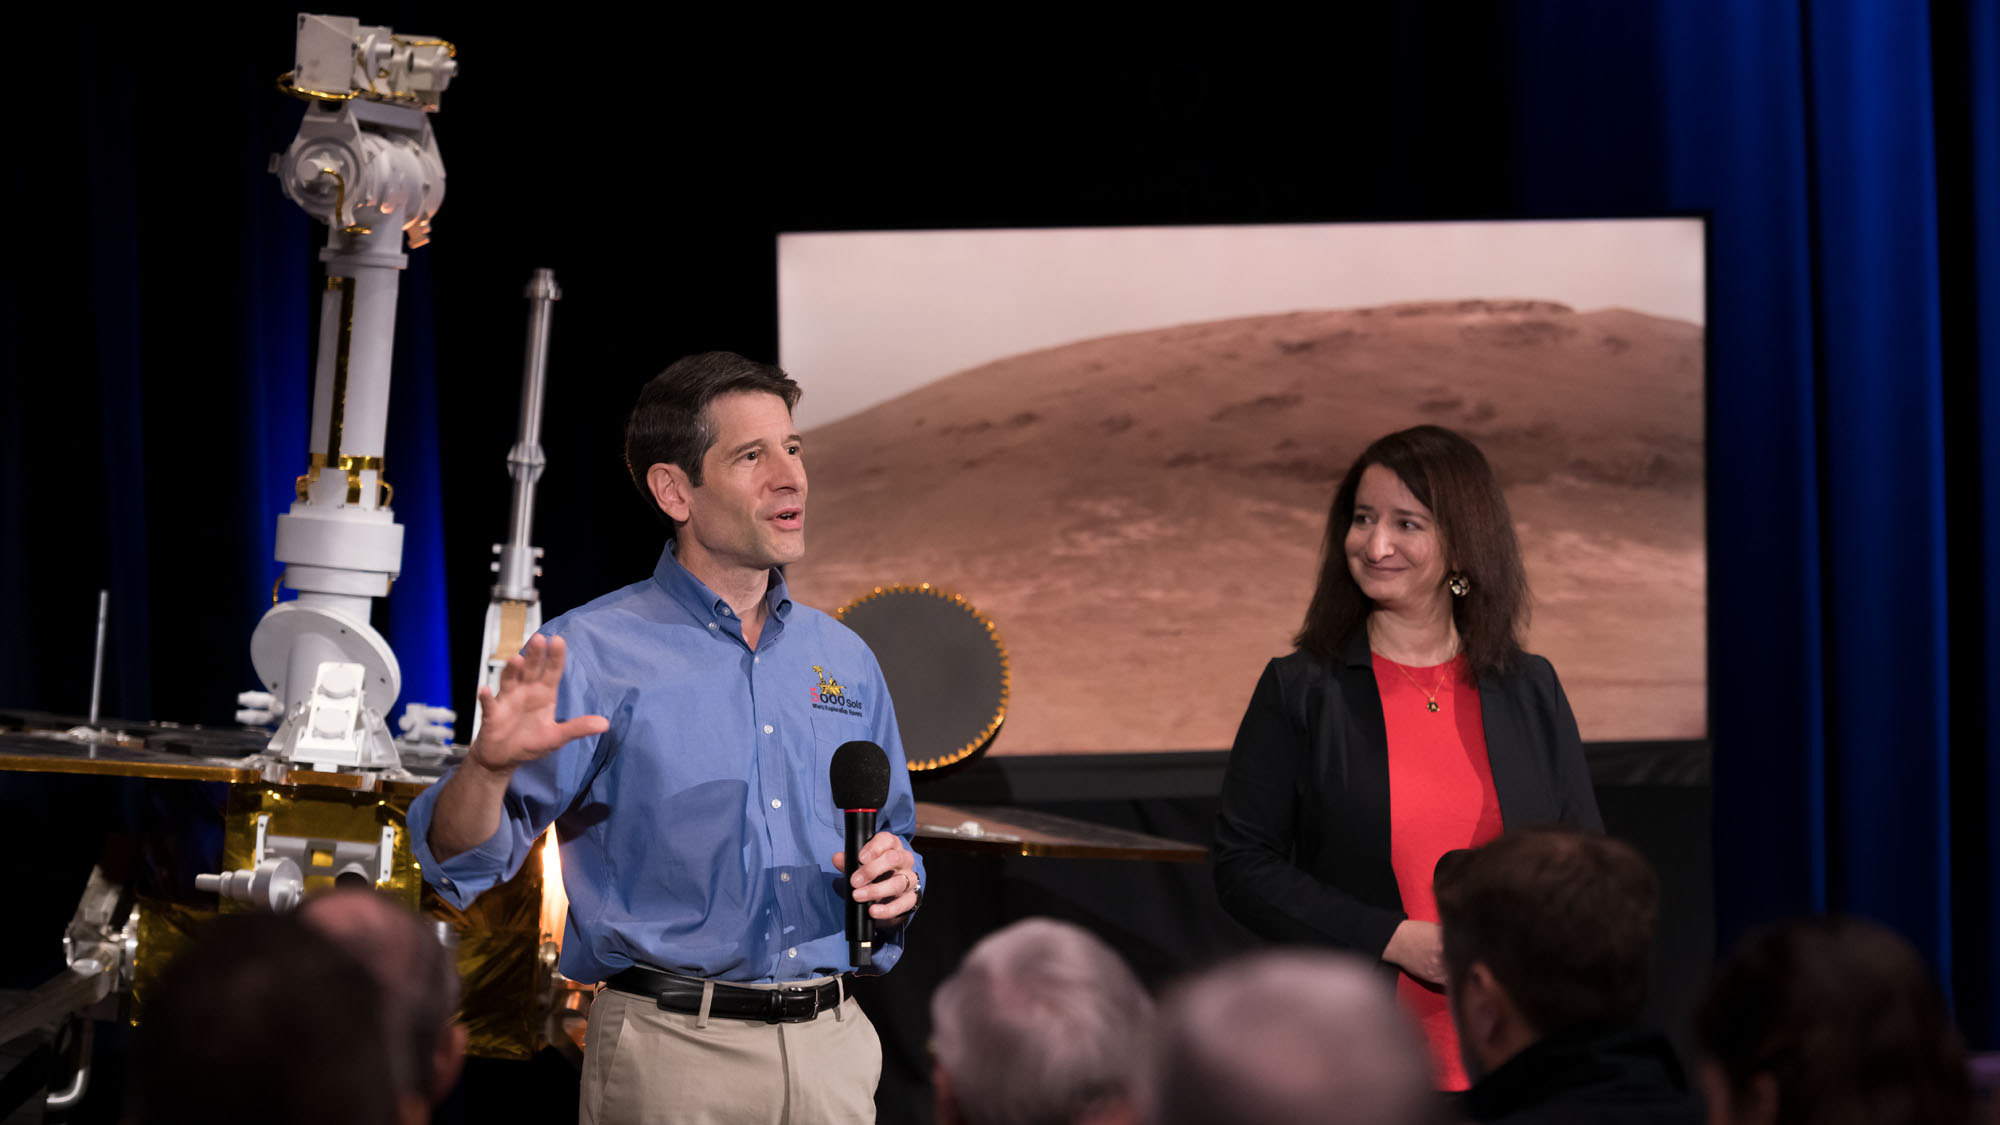 With a model of NASA's Opportunity rover behind him, John Callas, project manager of the Spirit and Opportunity Mars rovers, speaks about the rovers' achievements at the agency's Jet Propulsion Laboratory in Pasadena, California. Deputy Project Scientist Abigail Fraeman (right) looks on.